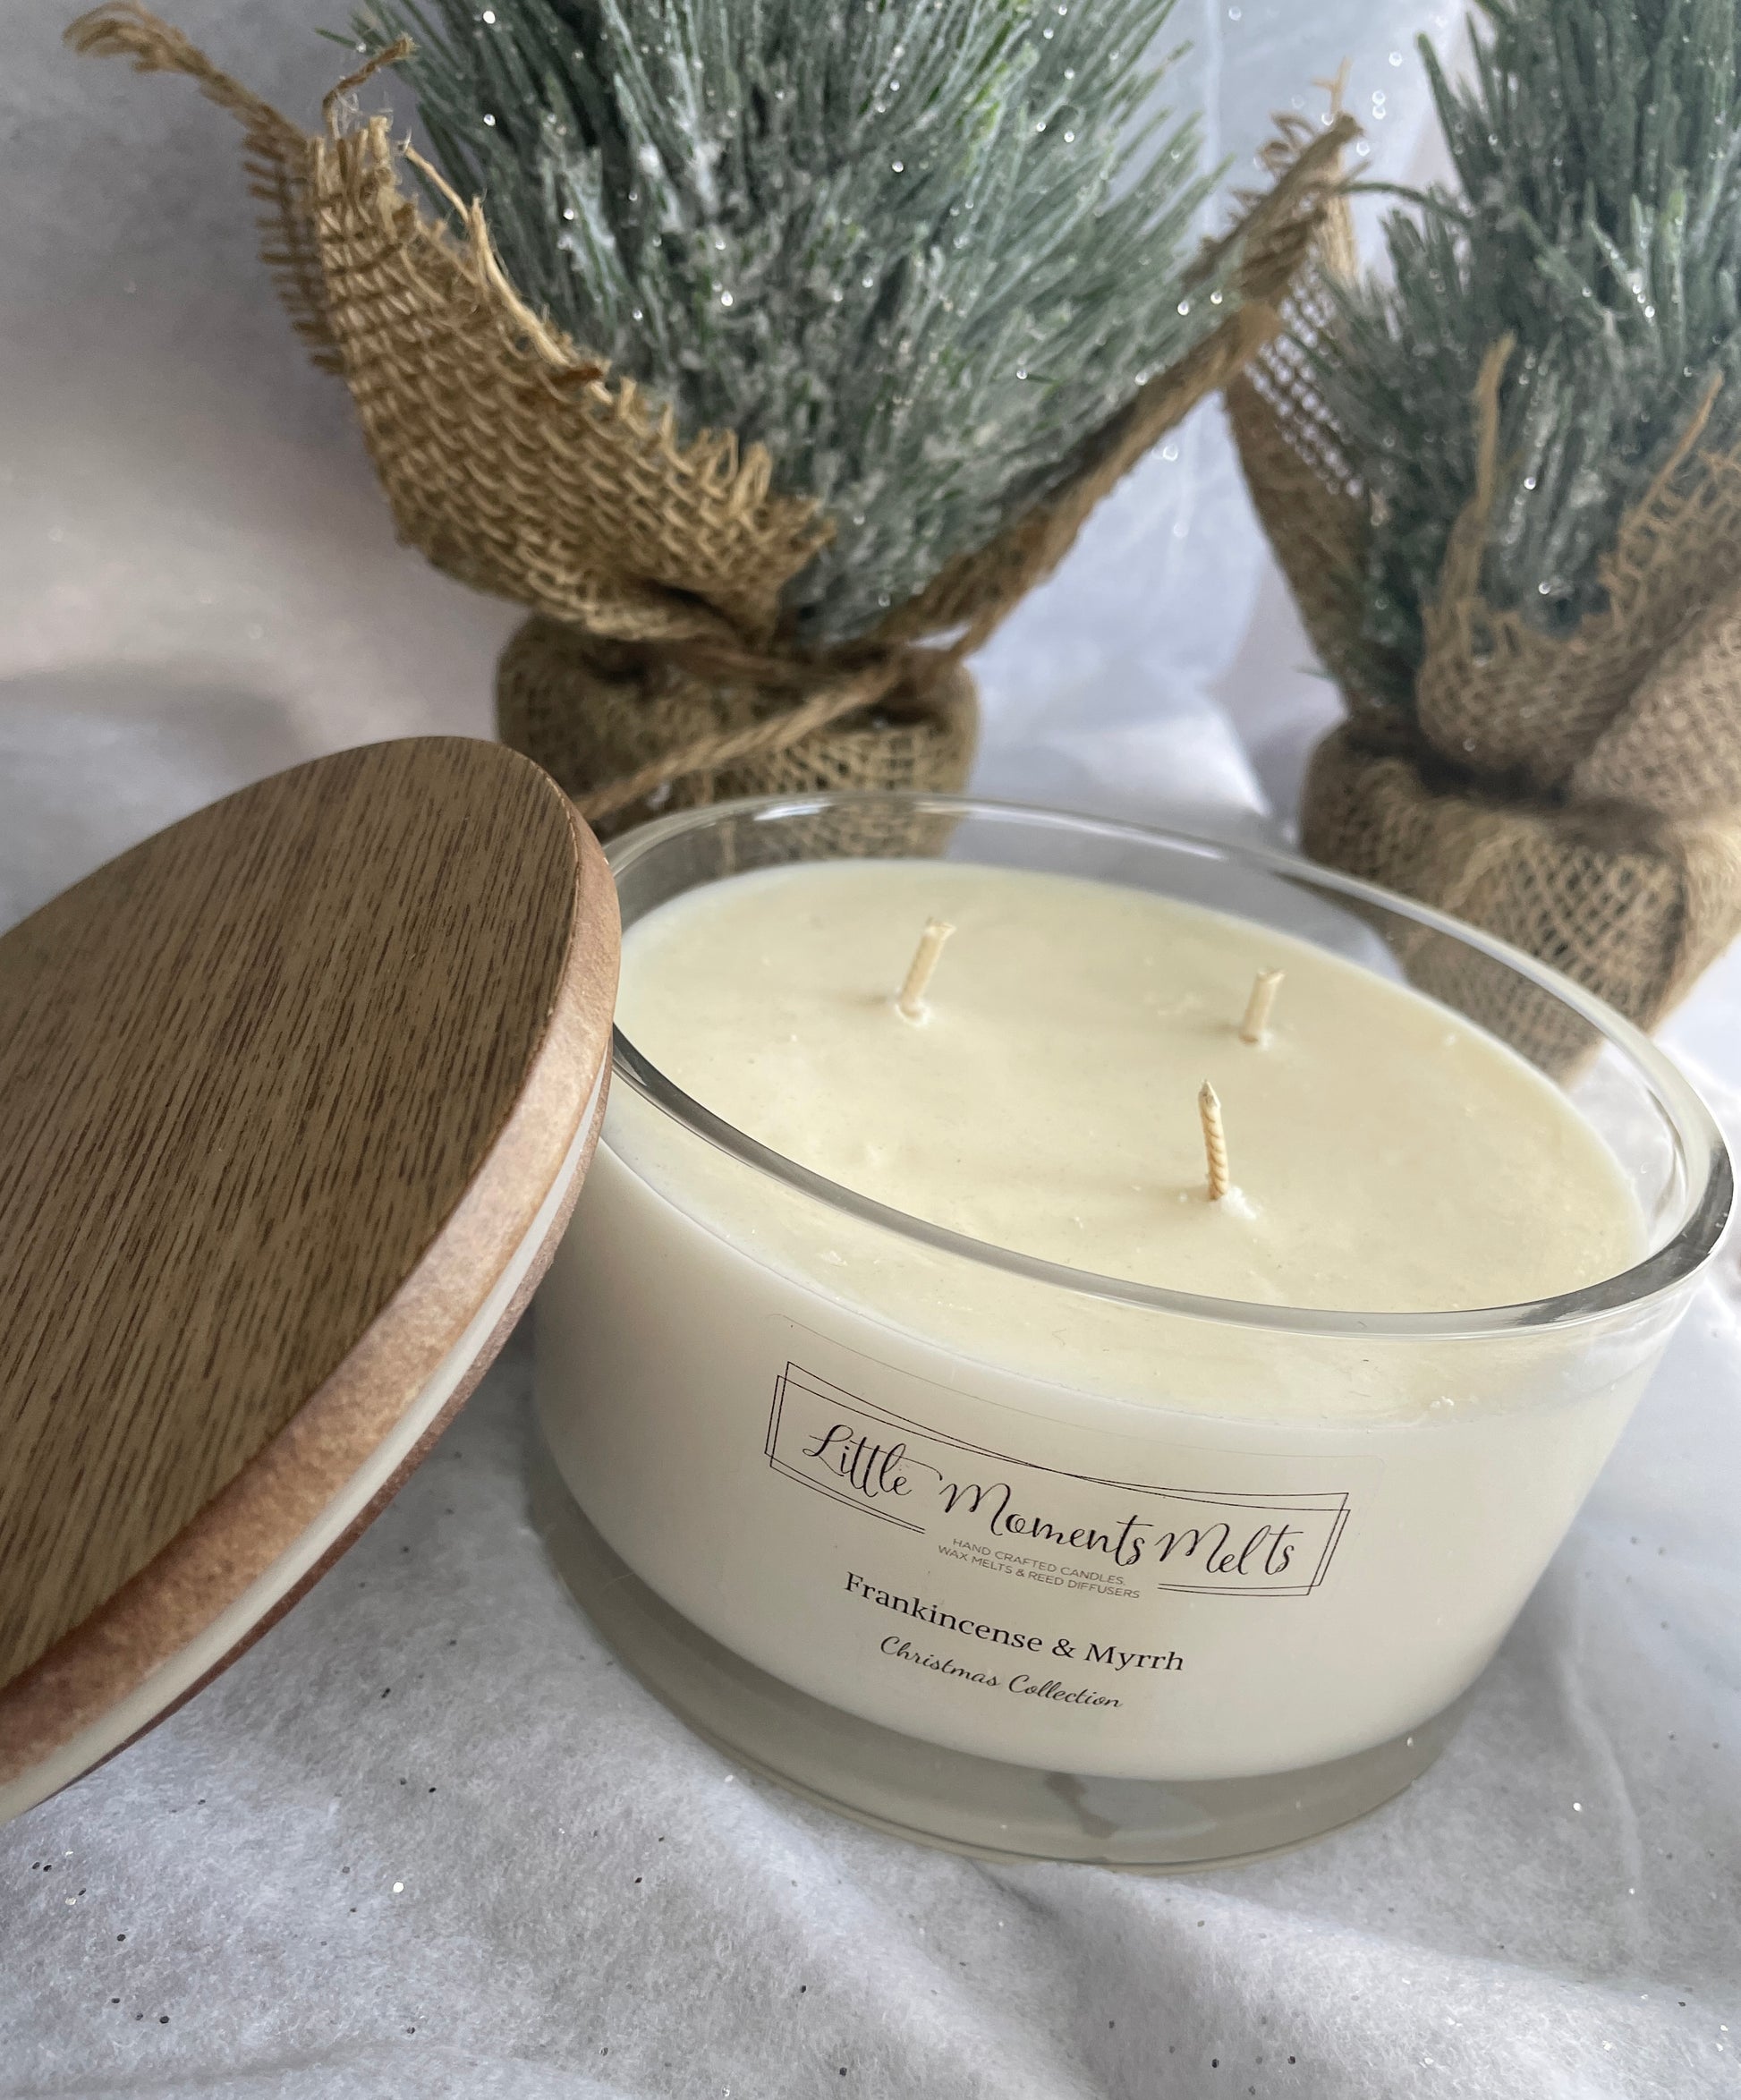 Hand poured 3 wick candle from Little Moments Melts